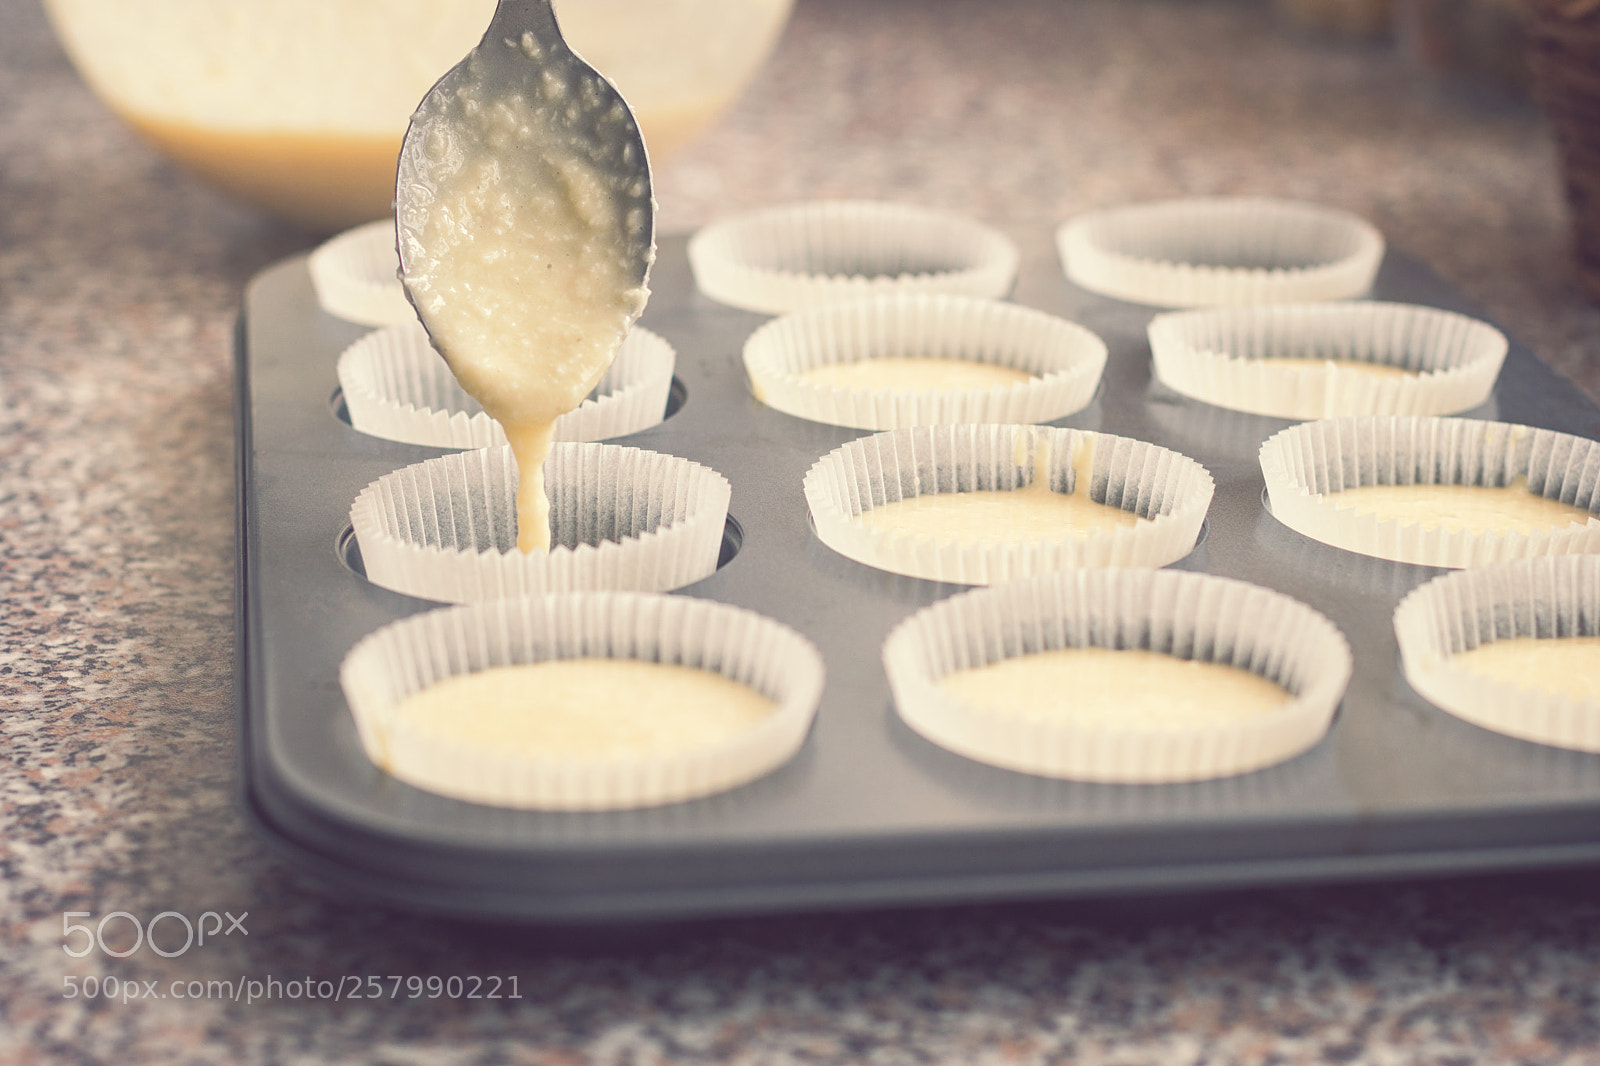 Sony a6300 sample photo. Preparing muffins at home photography